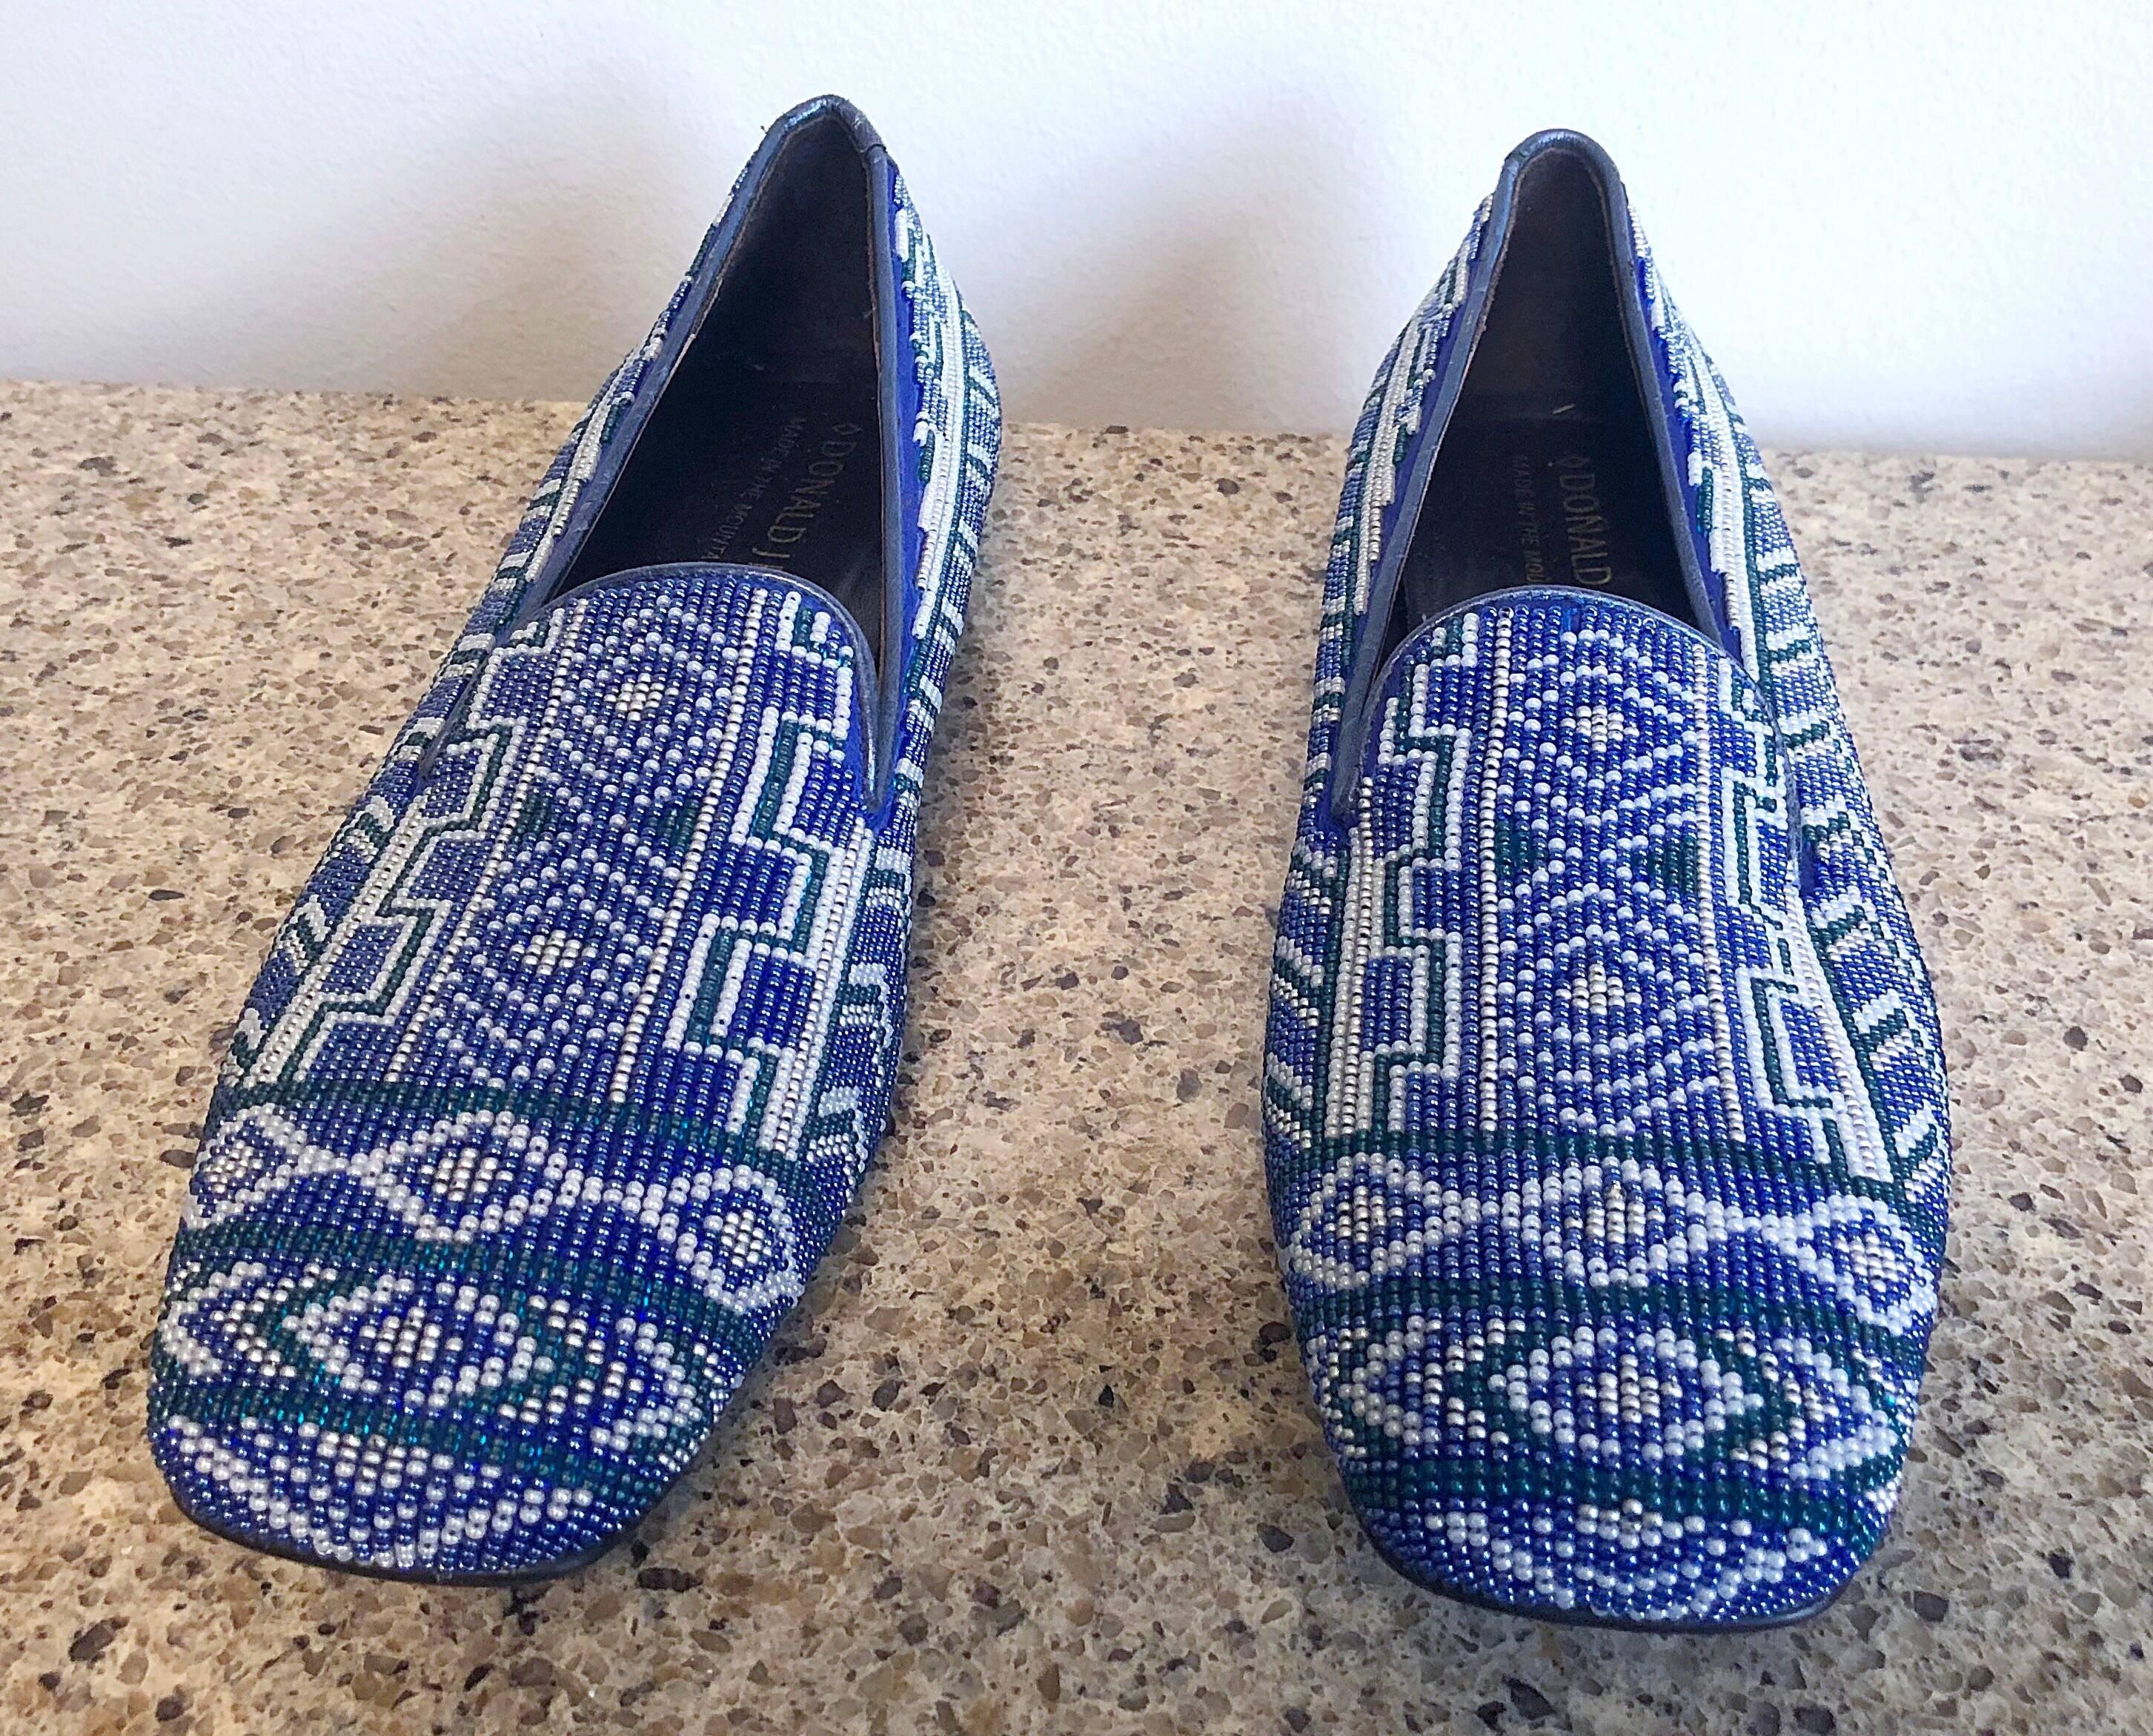 Brand new never worn late 90s DONALD J PLINER fully beaded driving / smoking loafers! Gorgeous hand beading in vibrant tones of all shades of blue, including light baby blue, teal, and royal blue. Navajo pattern. Sturdy rubber soles make great for